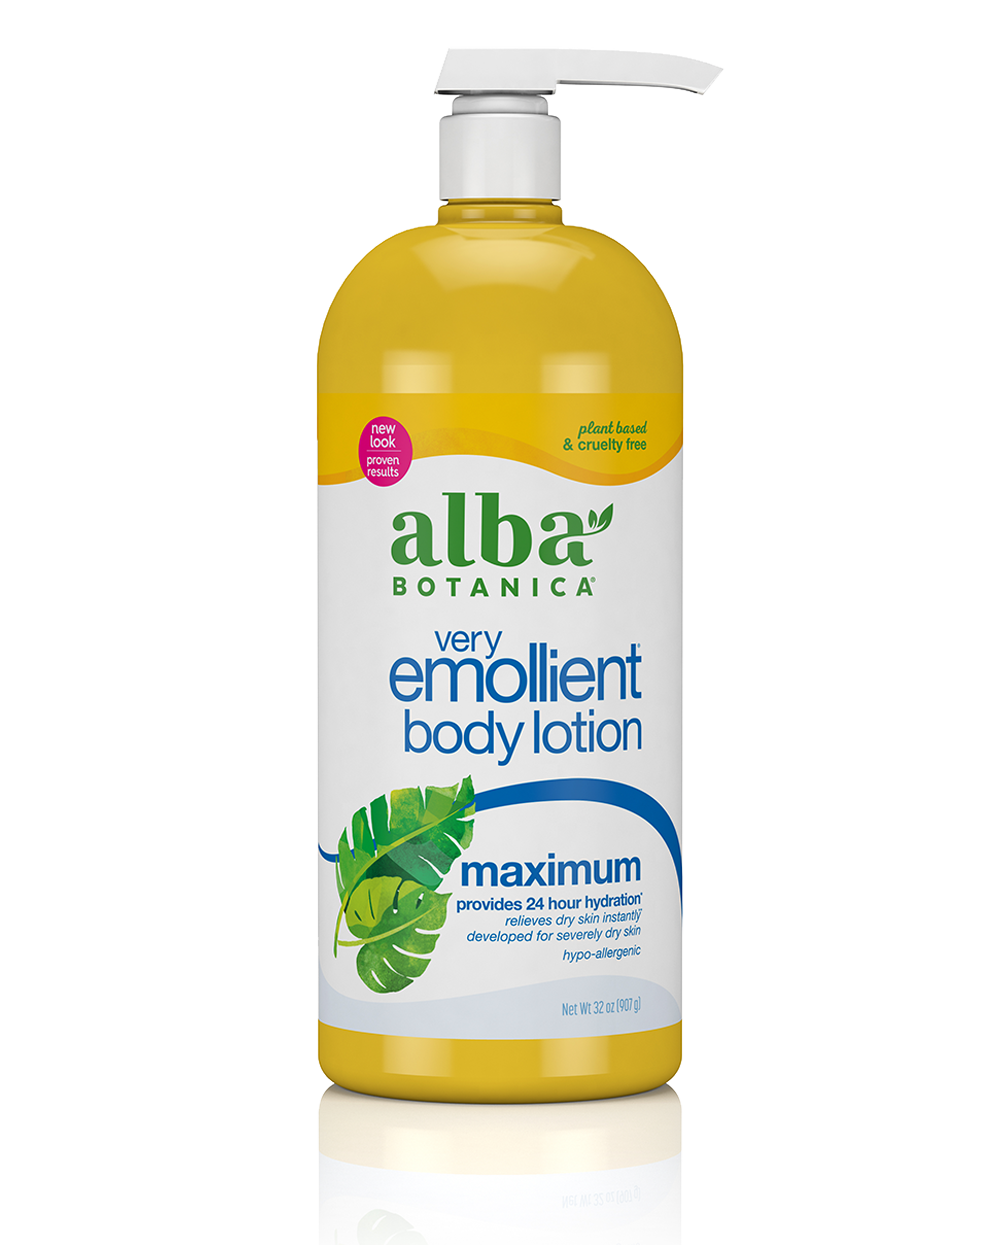 very emollient™ body lotion